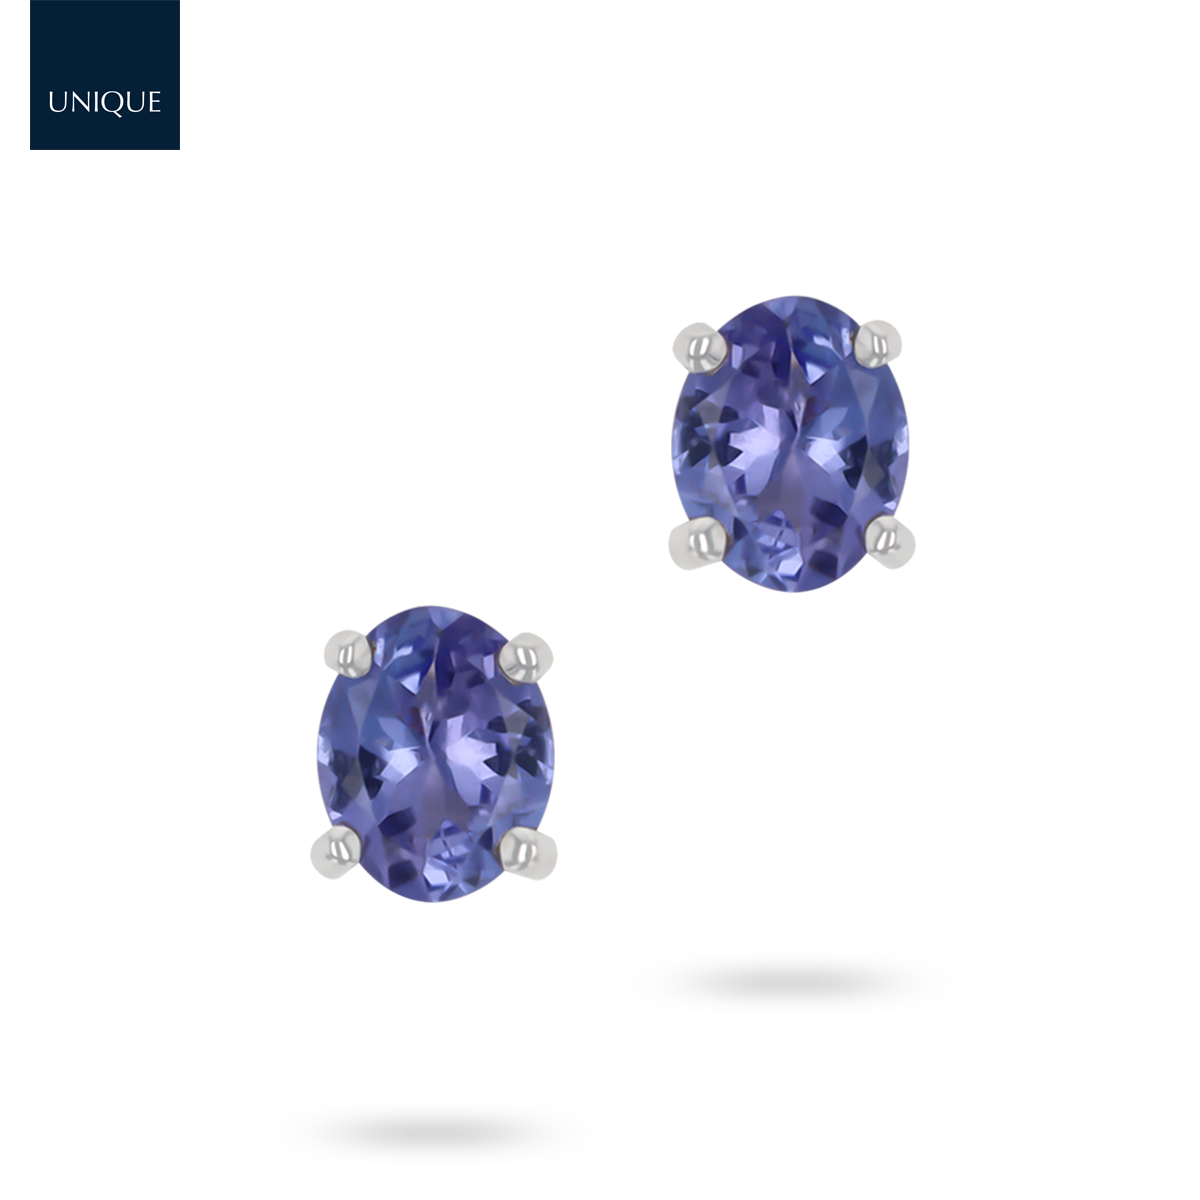 9ct White Gold Oval Cut Tanzanite Solitaire Stud Earrings